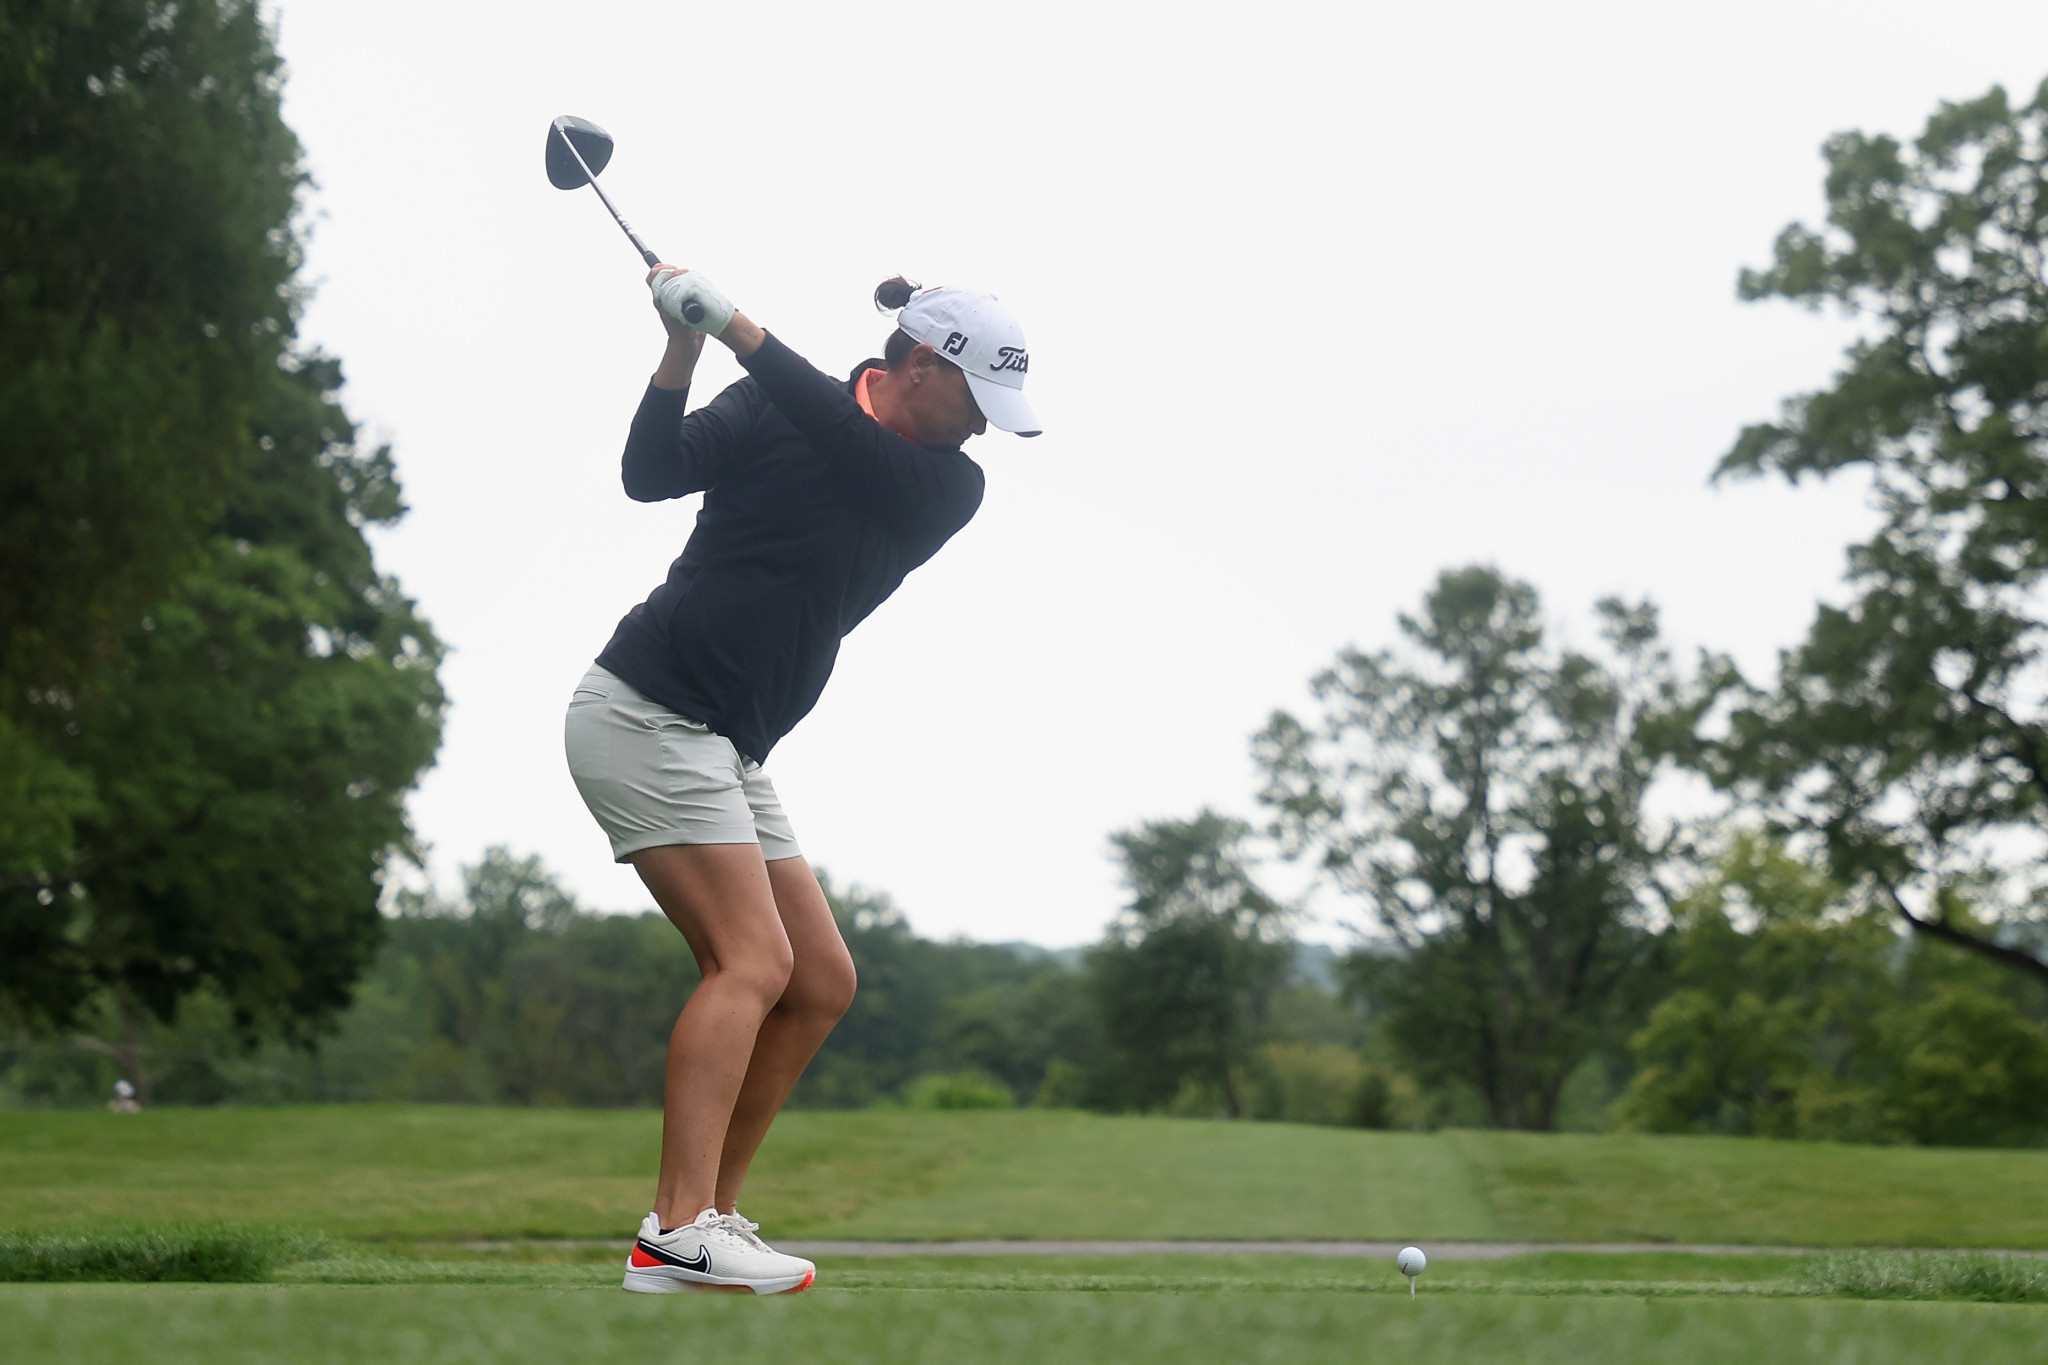 Pace leads the race after round one at Women's PGA Championship